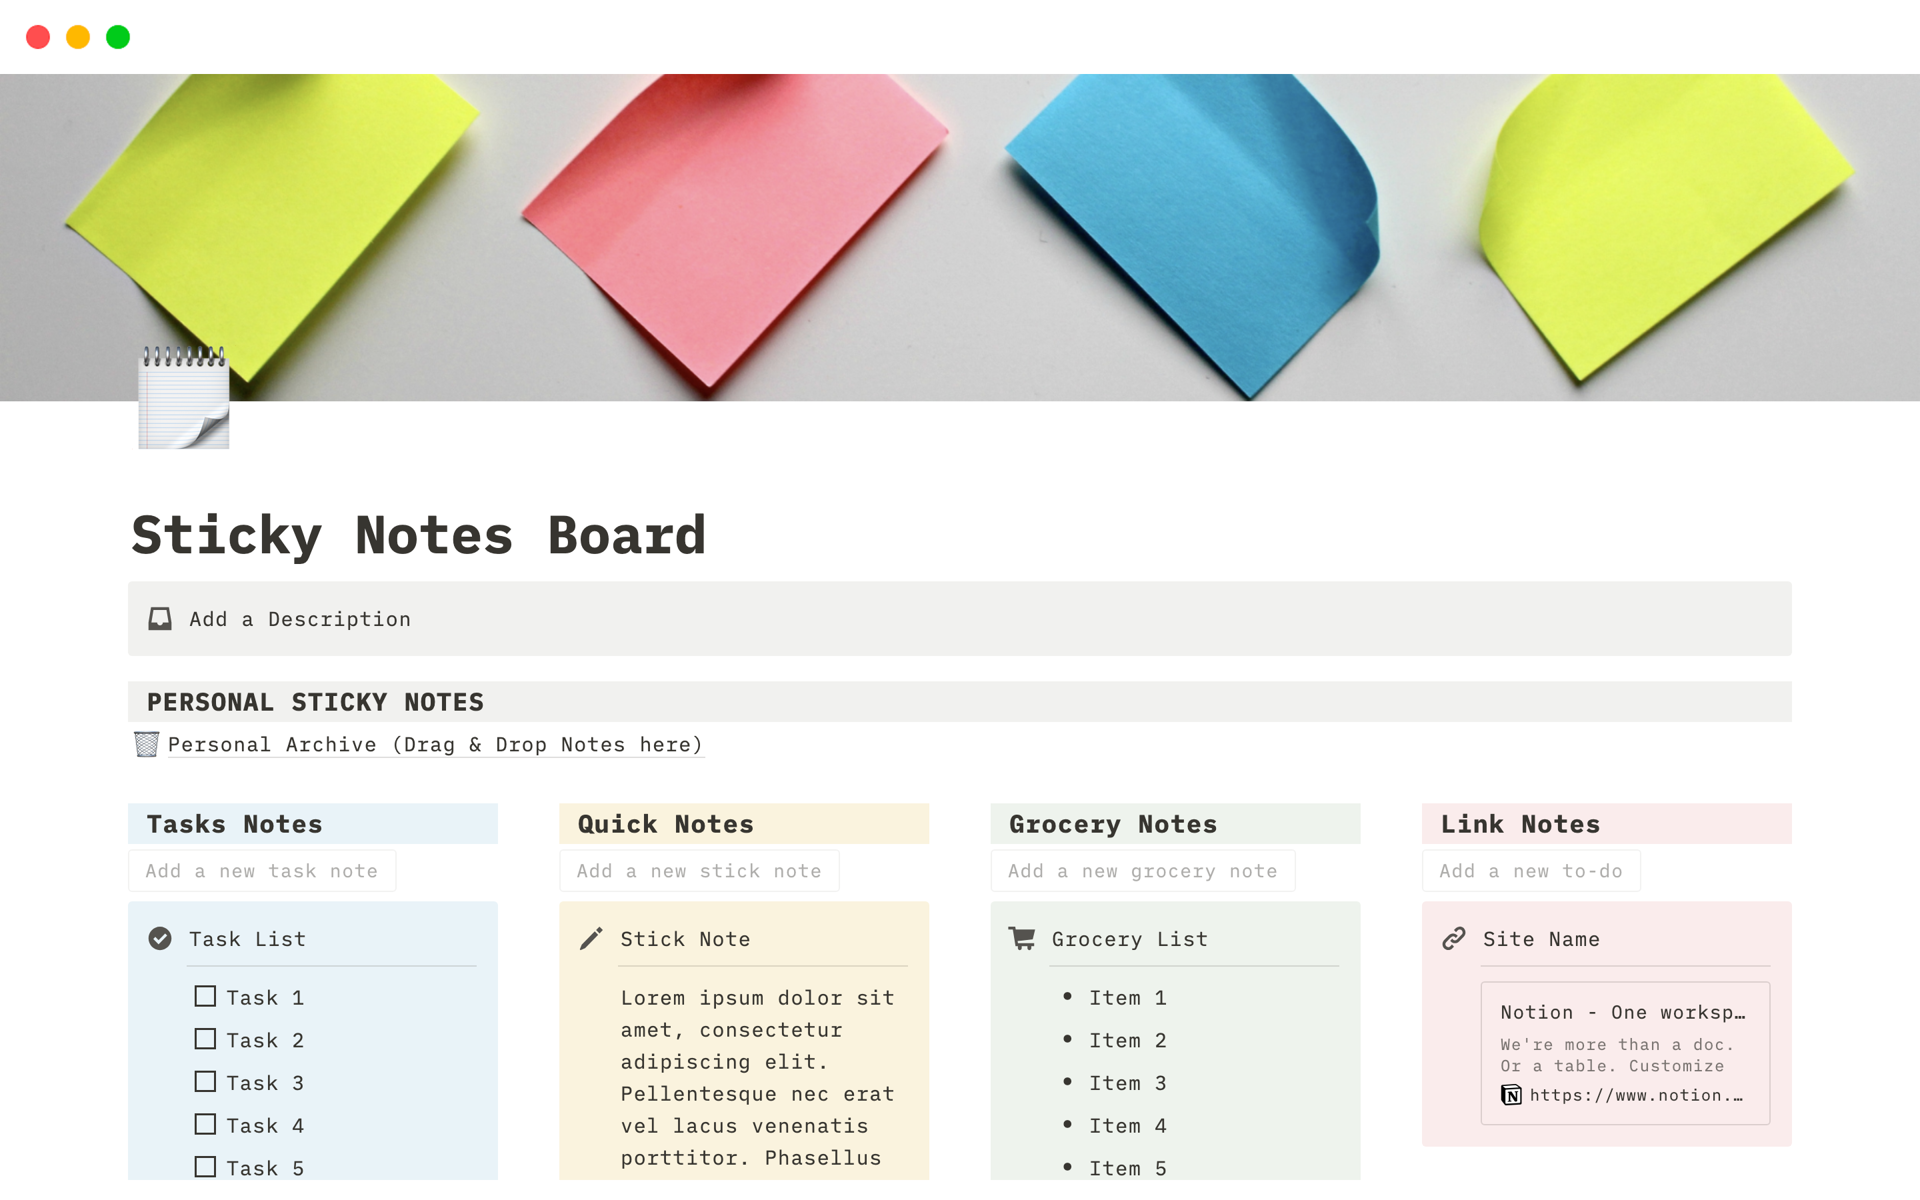 Sticky Notes Board provides a visual way to capture and organize tasks, notes, ideas, and meetings.